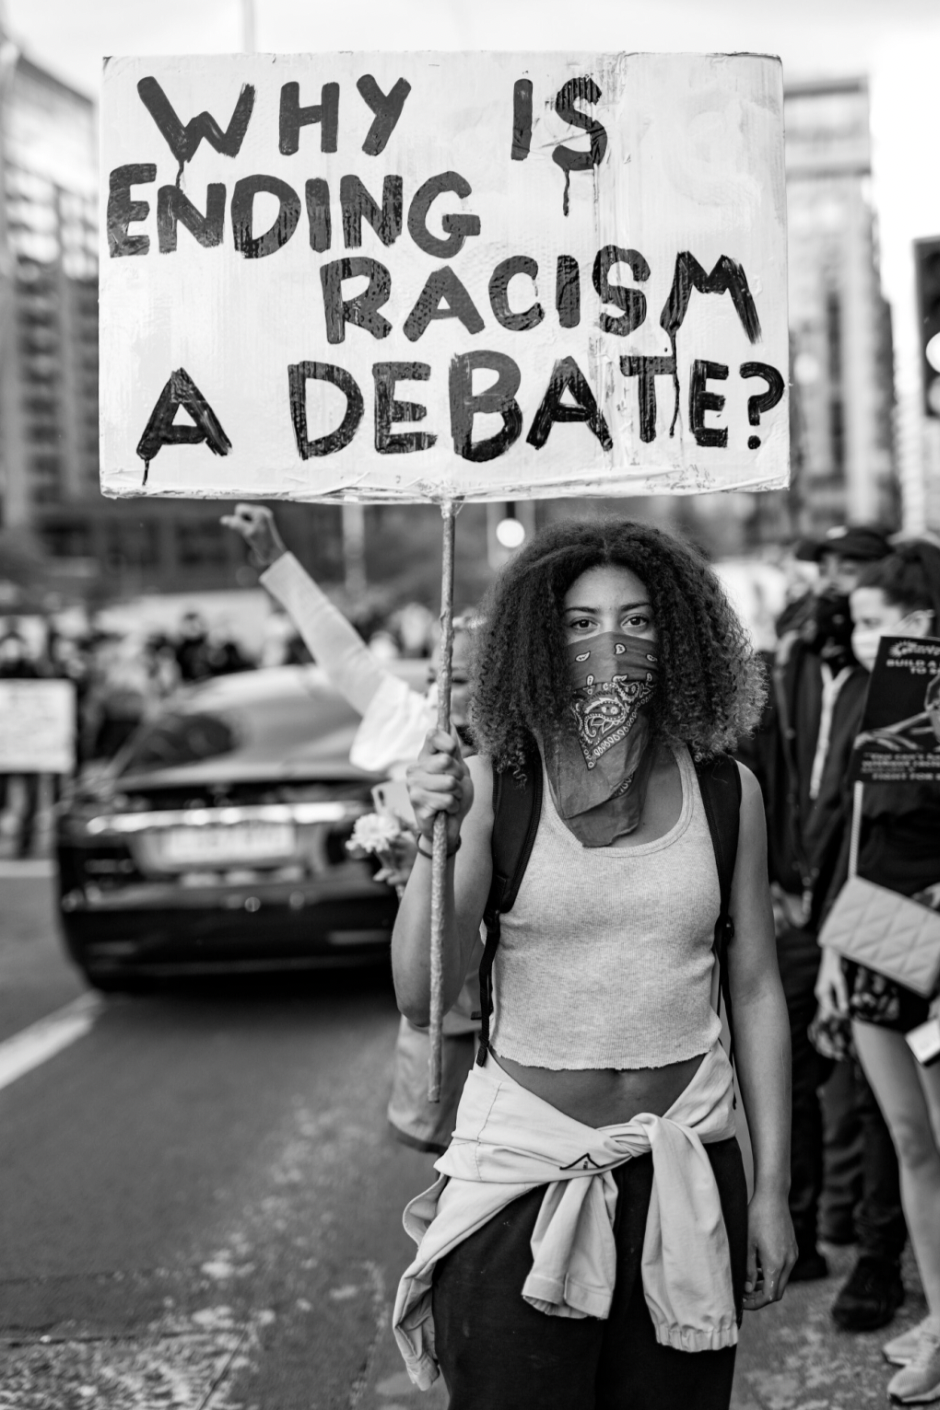 A black and white photograph of a woman wearing a bandana over her face holding a sign that says 